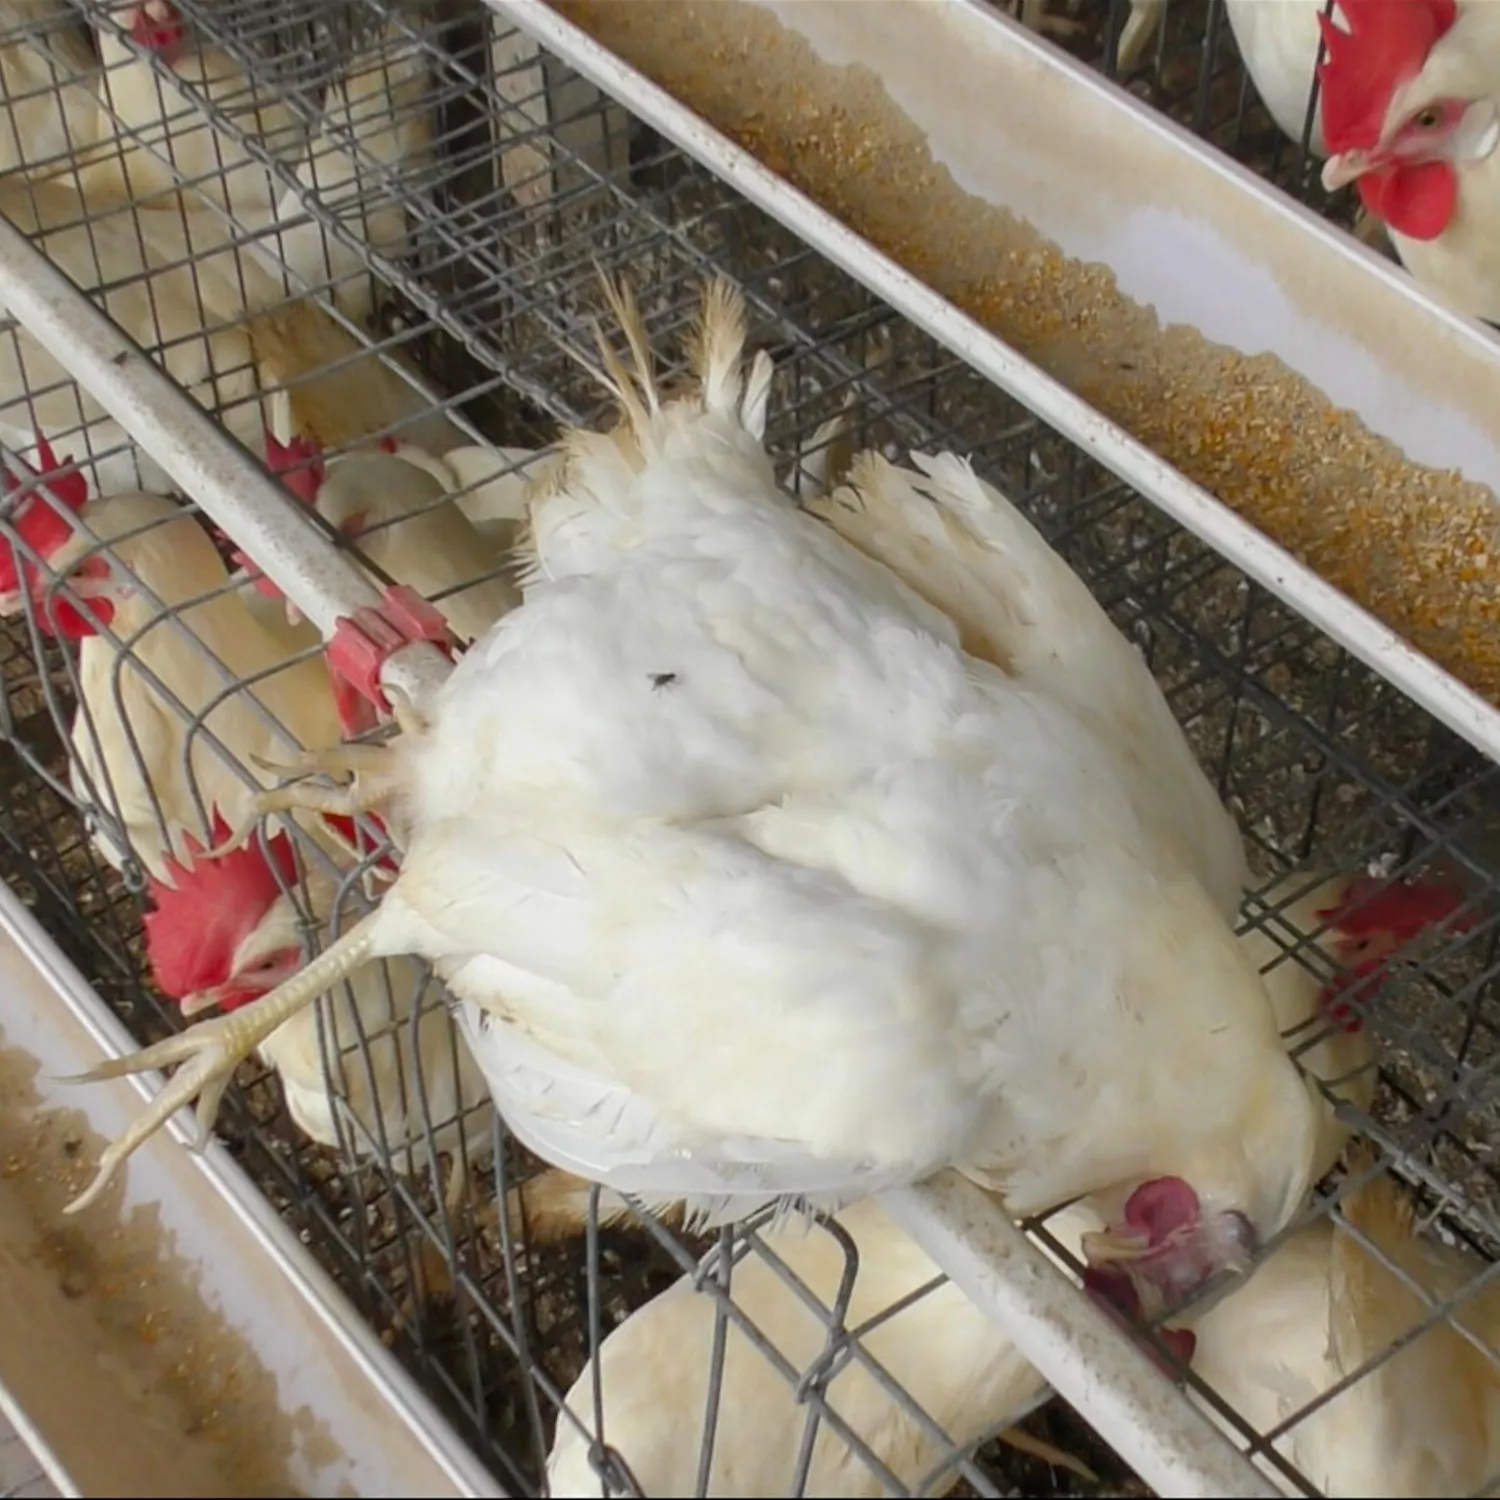 Dead hen on a cage